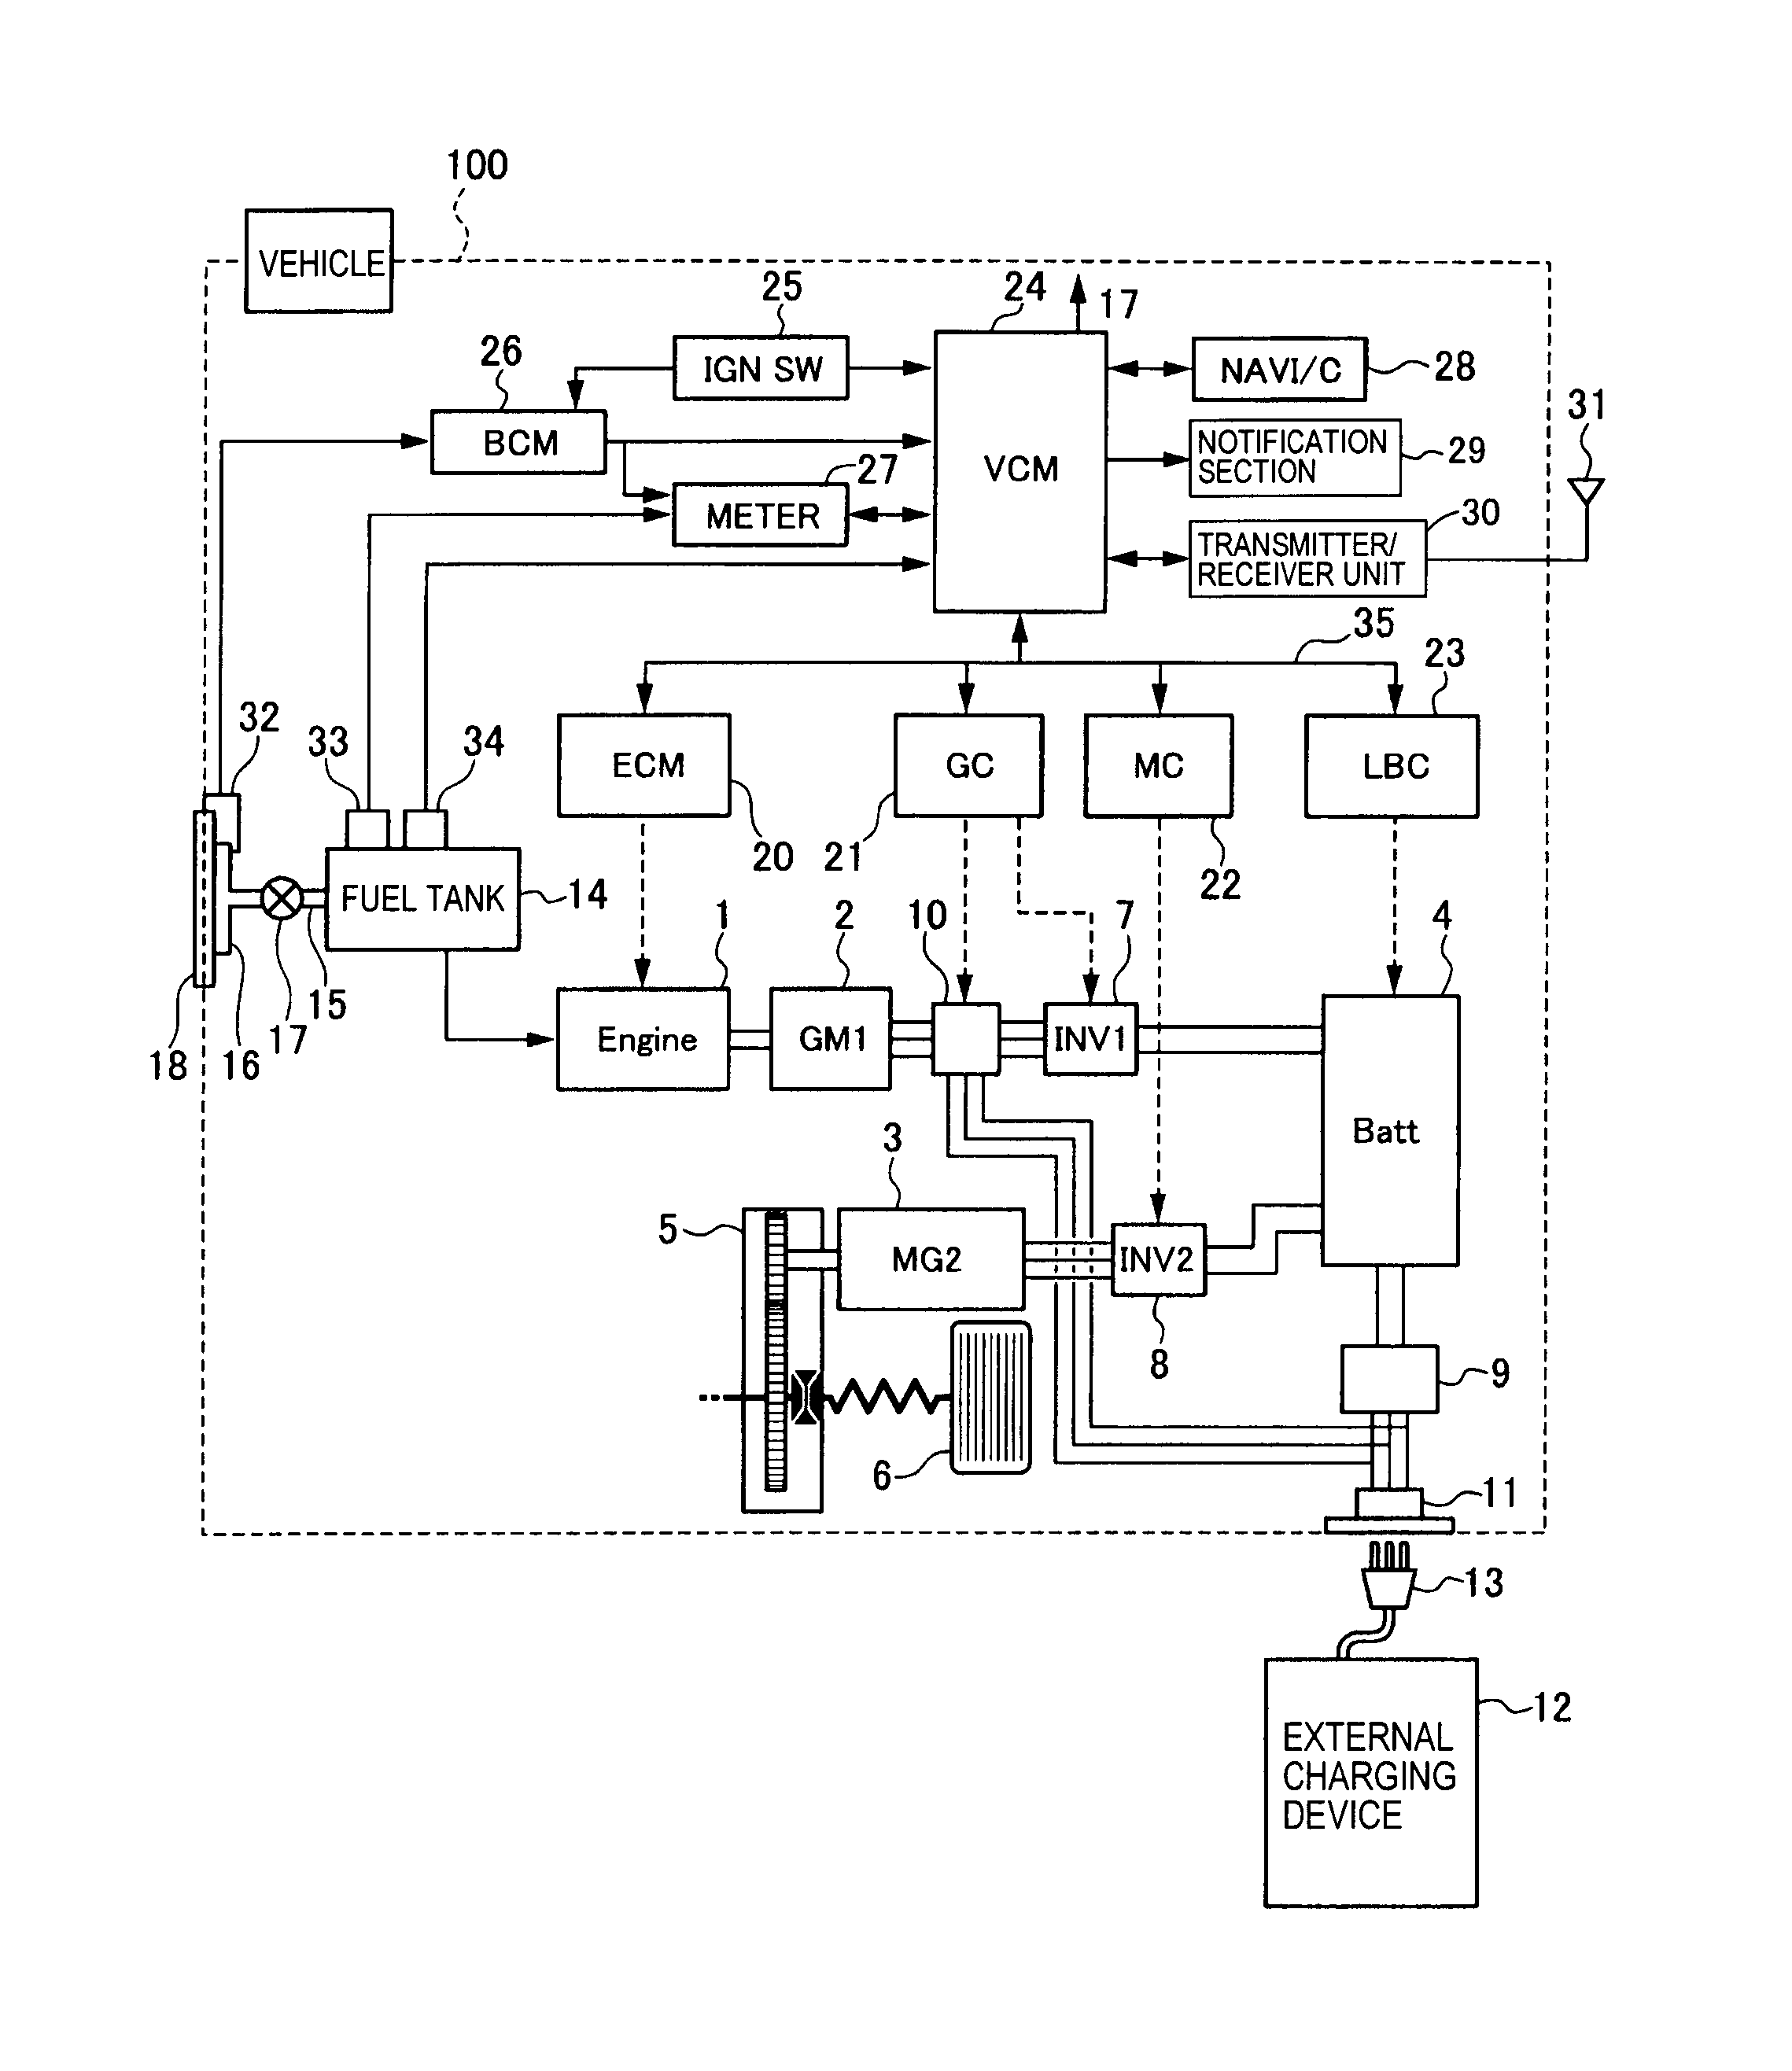 wiring diagram for 1941 9n ford tractor